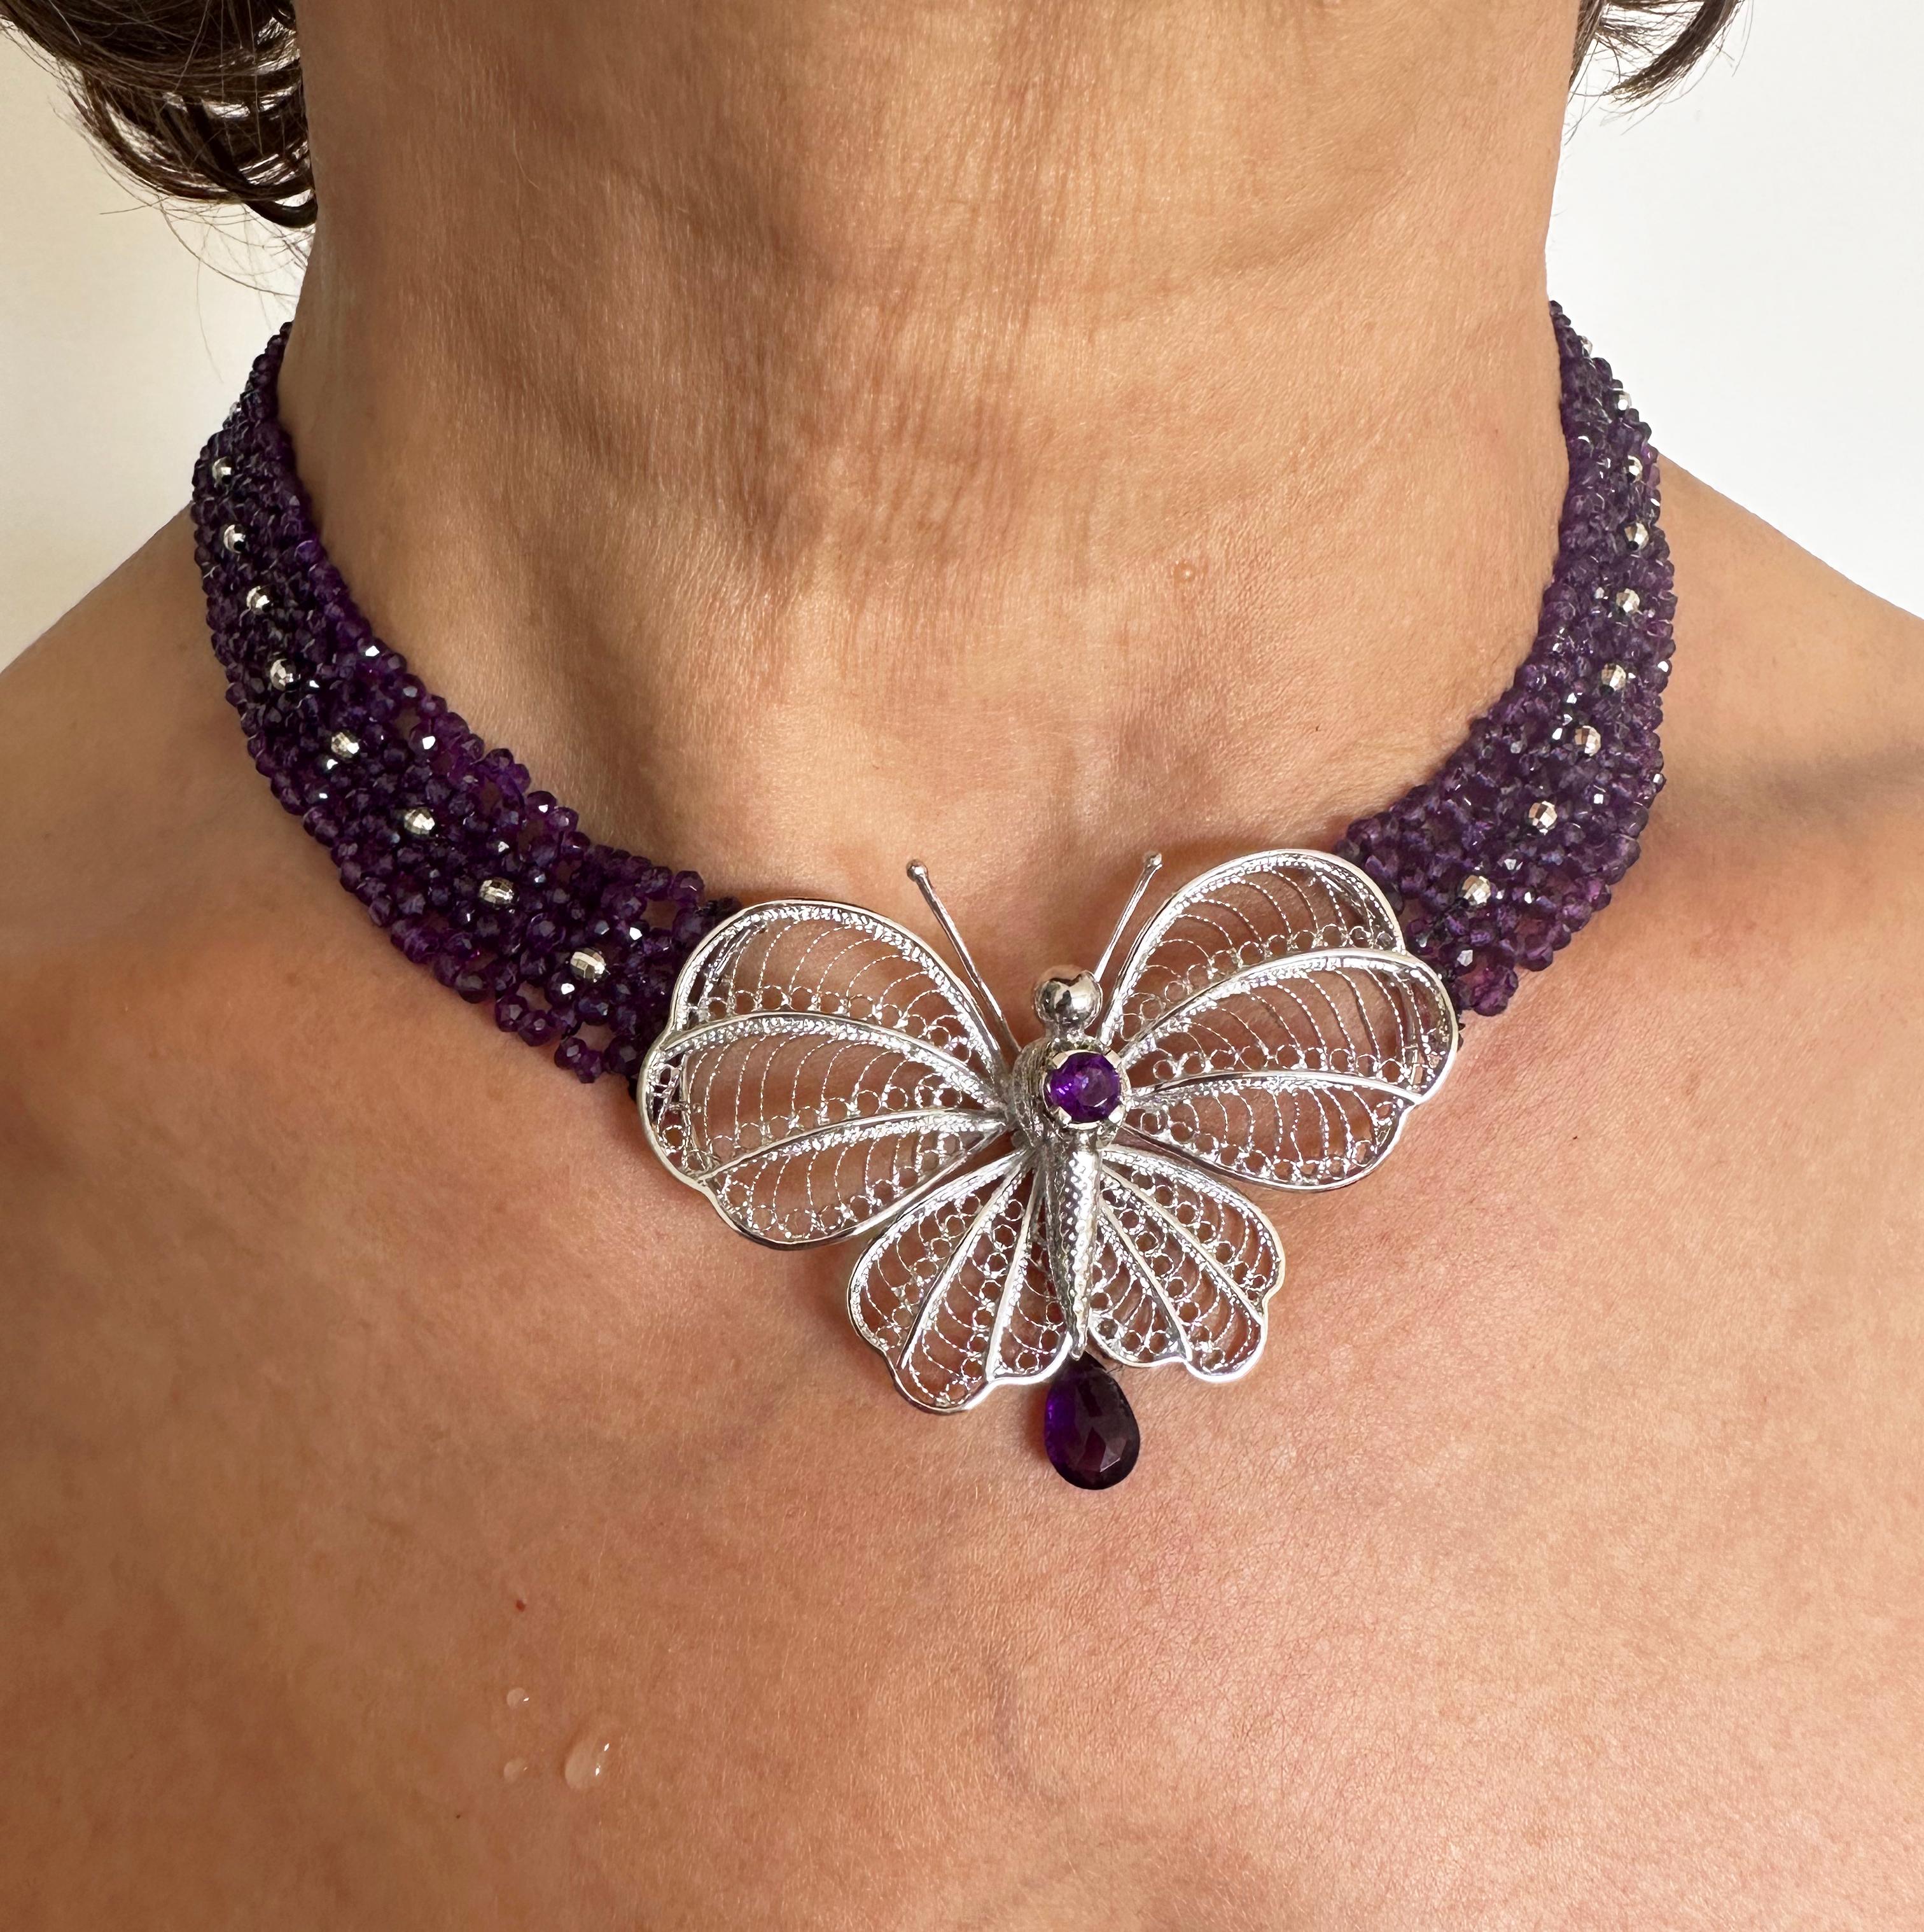 Bead Woven Amethyst Necklace with Silver Butterfly Centerpiece For Sale